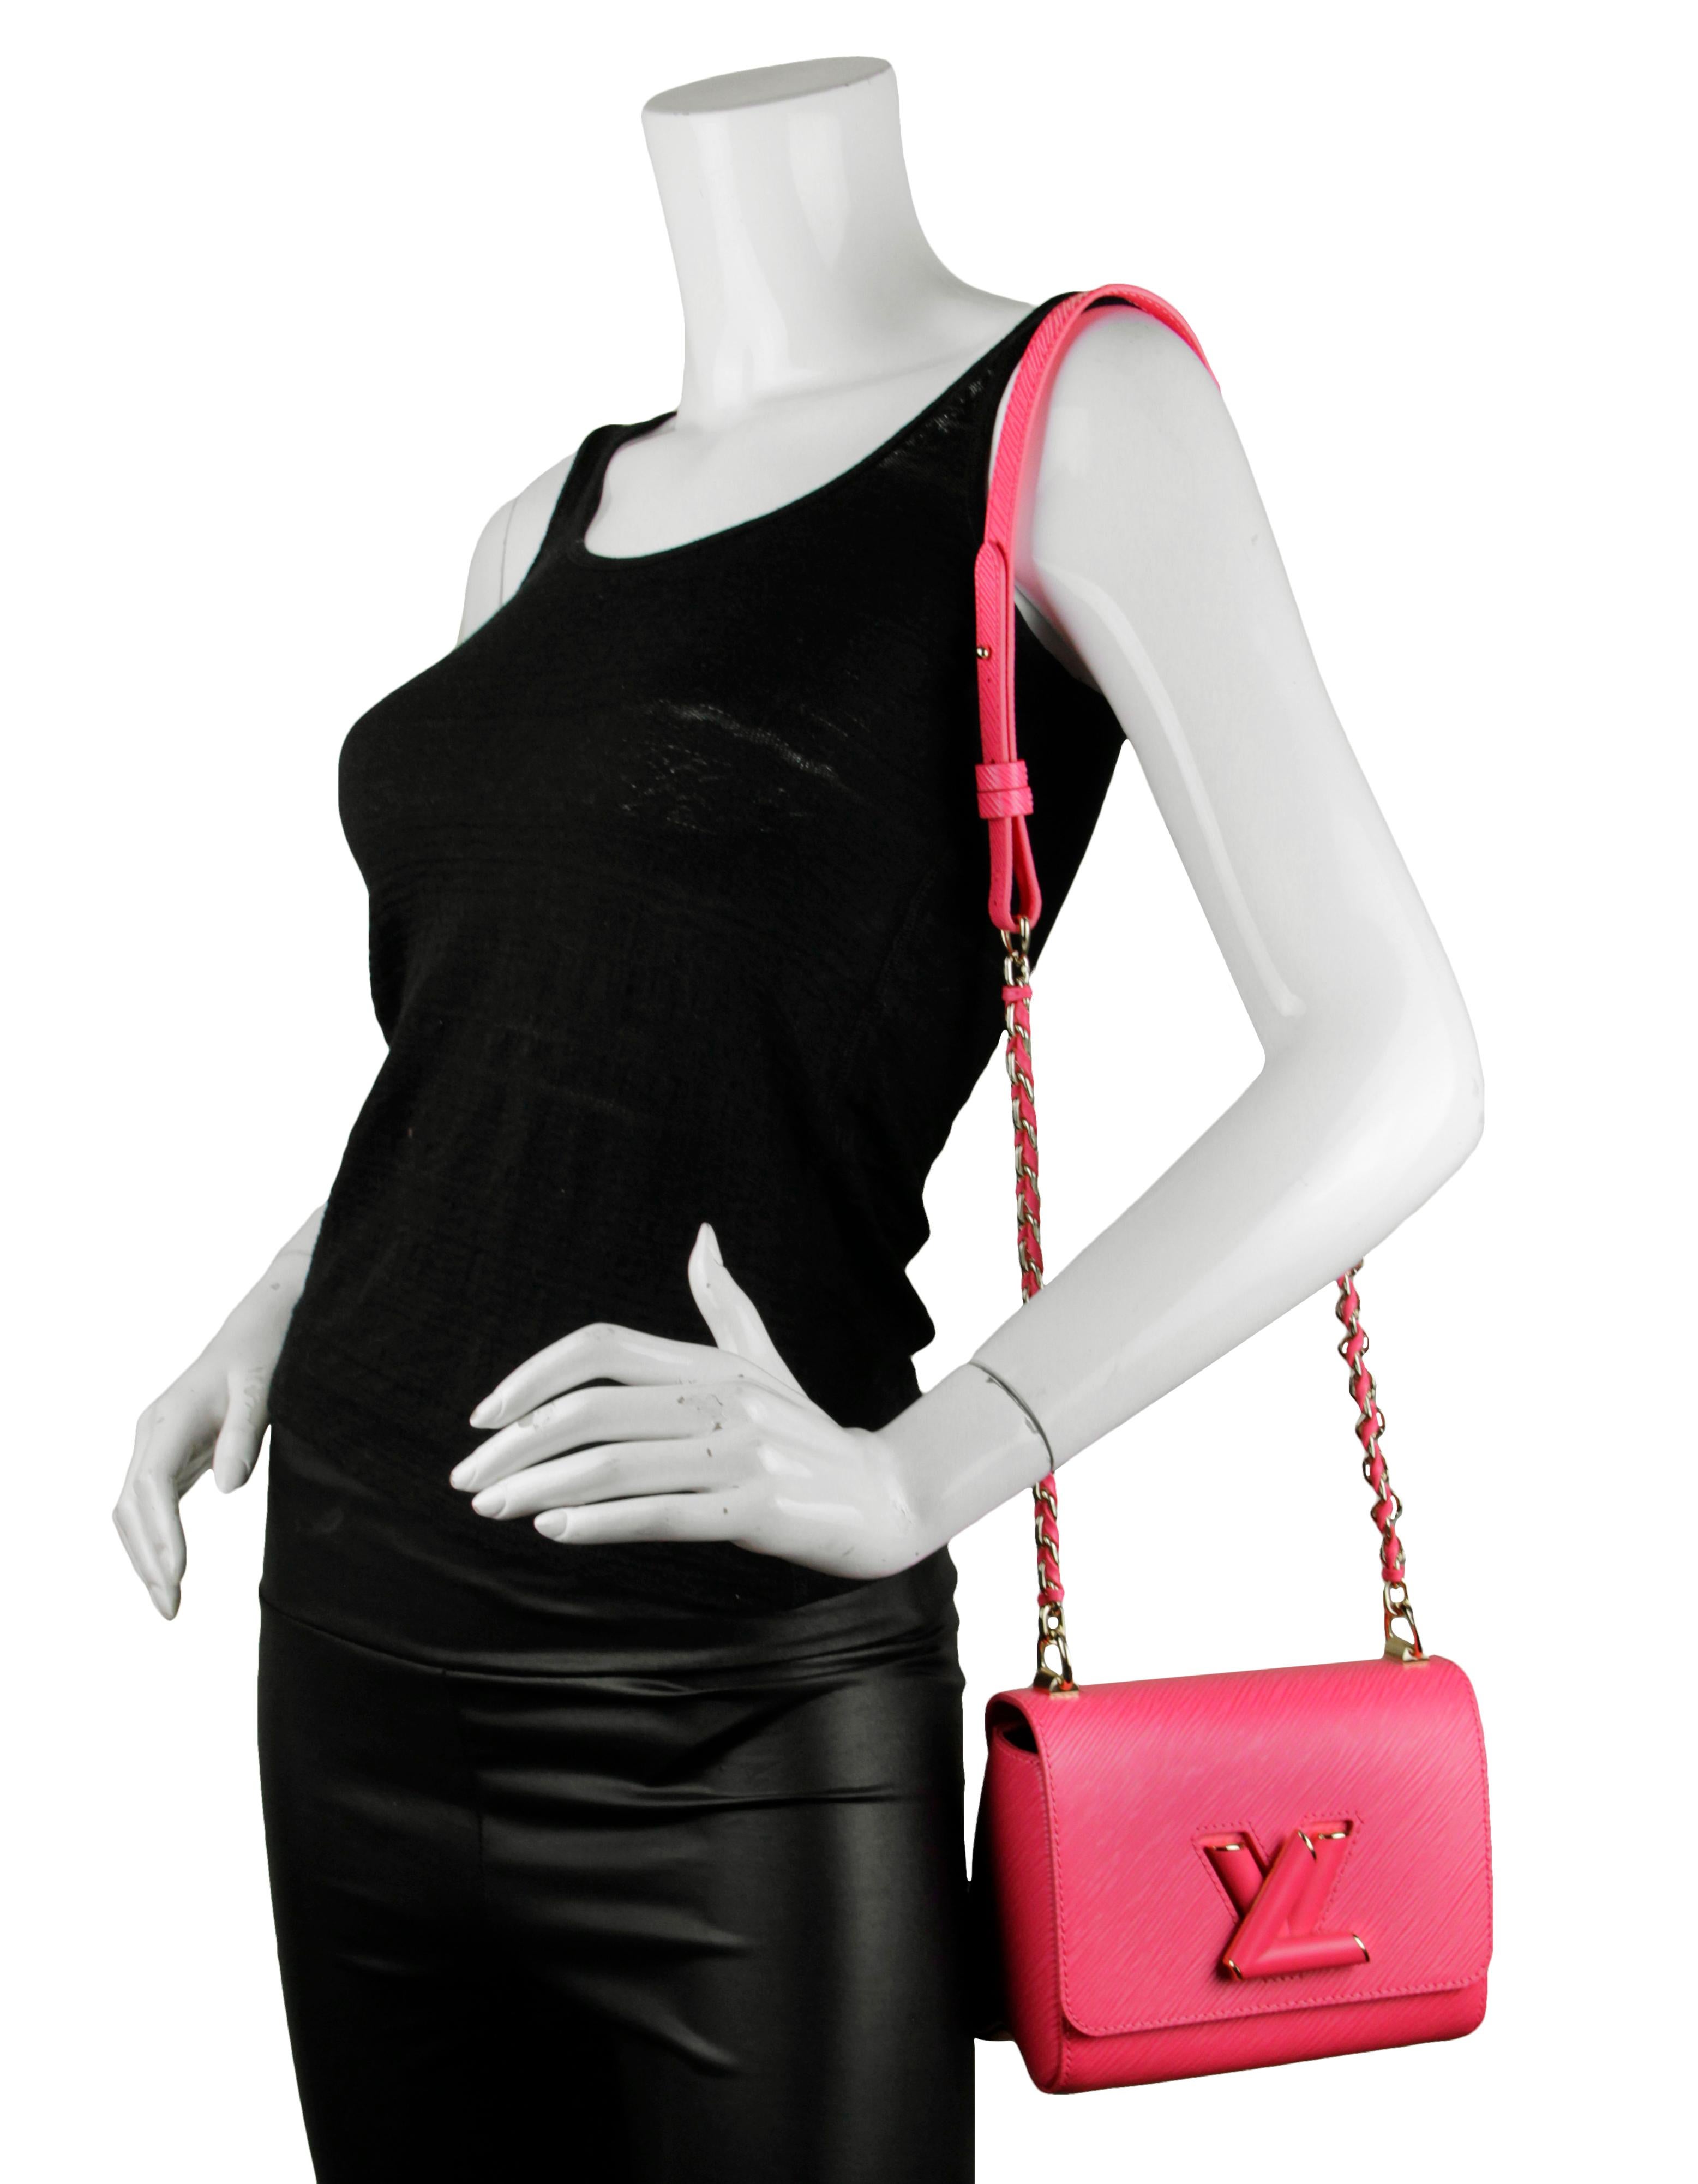 Louis Vuitton Dragon Fruit Epi Leather Twist PM CrossbodyBag

Made In: France
Color: Dragon fruit pink
Hardware: Tone-on-tone and gold-color hardware
Materials: Epi leather with cowhide leather trim
Lining: Microfiber
Closure/Opening: LV